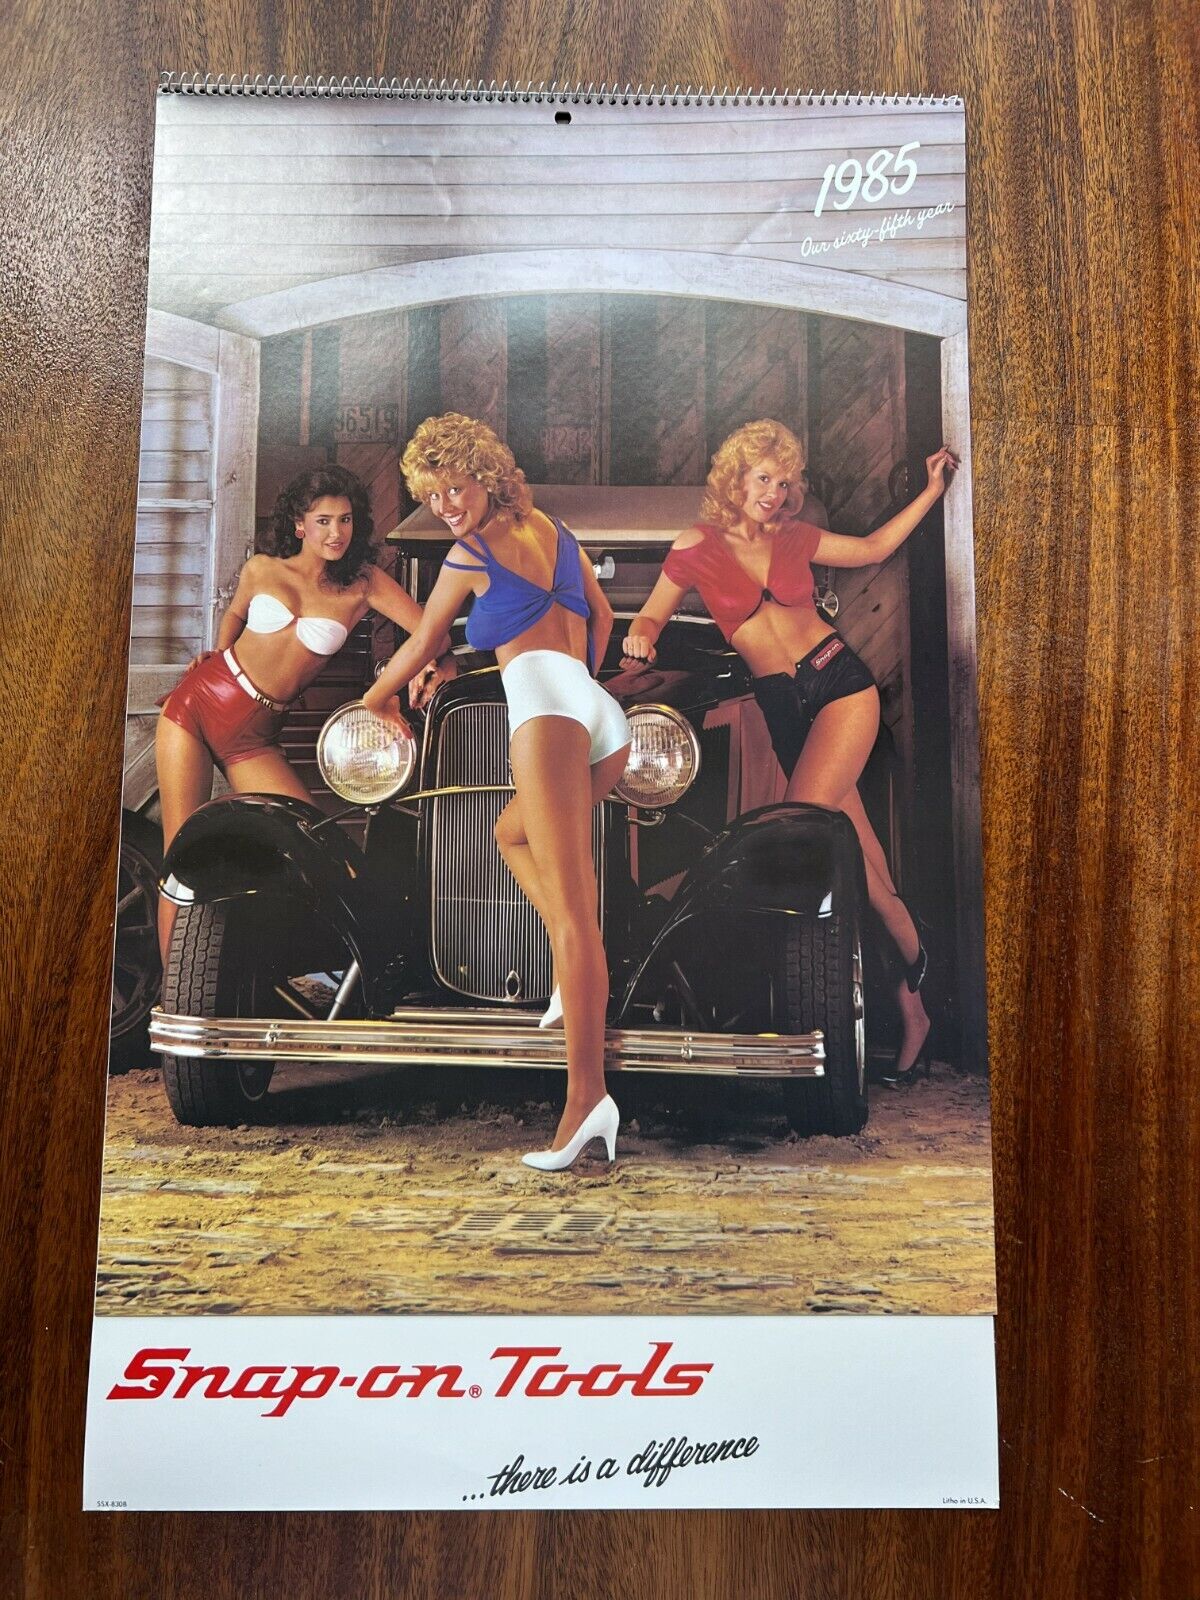 SET OF 3 Rare Vintage 1985 SNAP-ON TOOLS Collectors Edition Pinup Girl Calendar